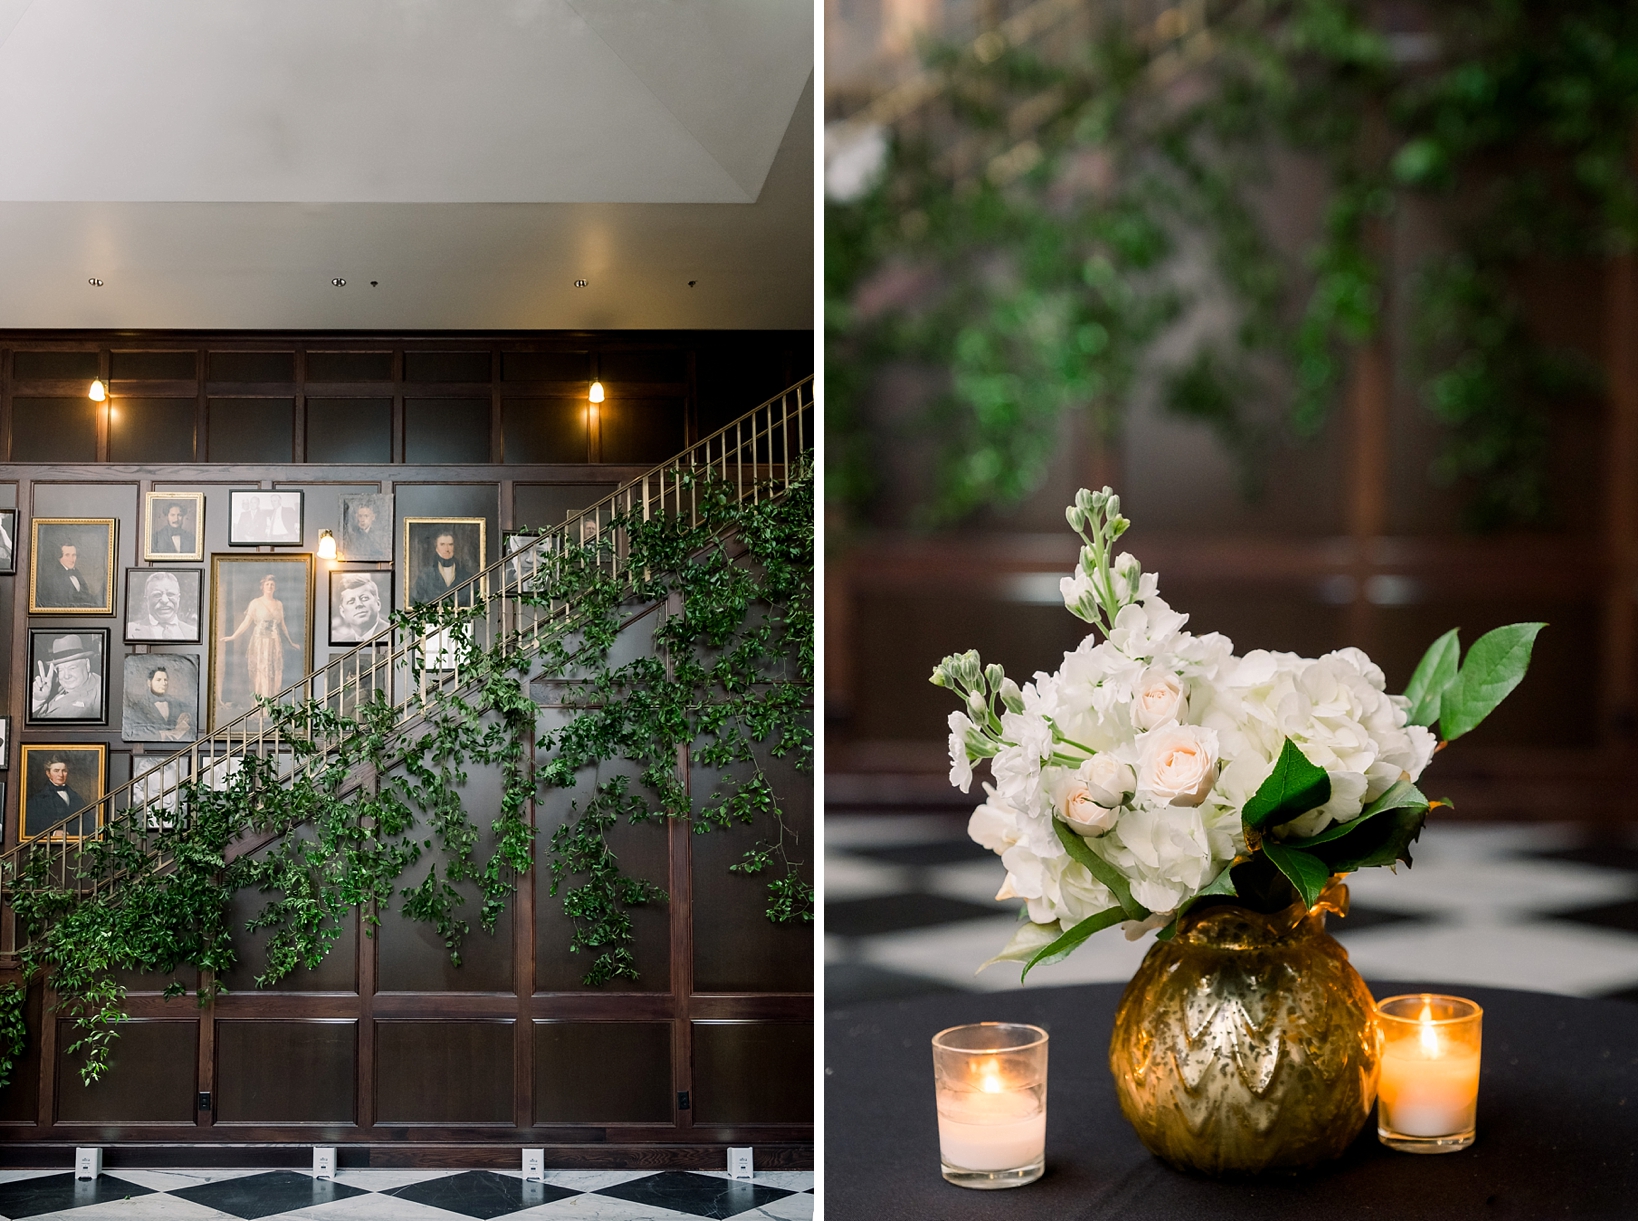 oxford exchange wedding day filled with greenery and simple floral centerpieces